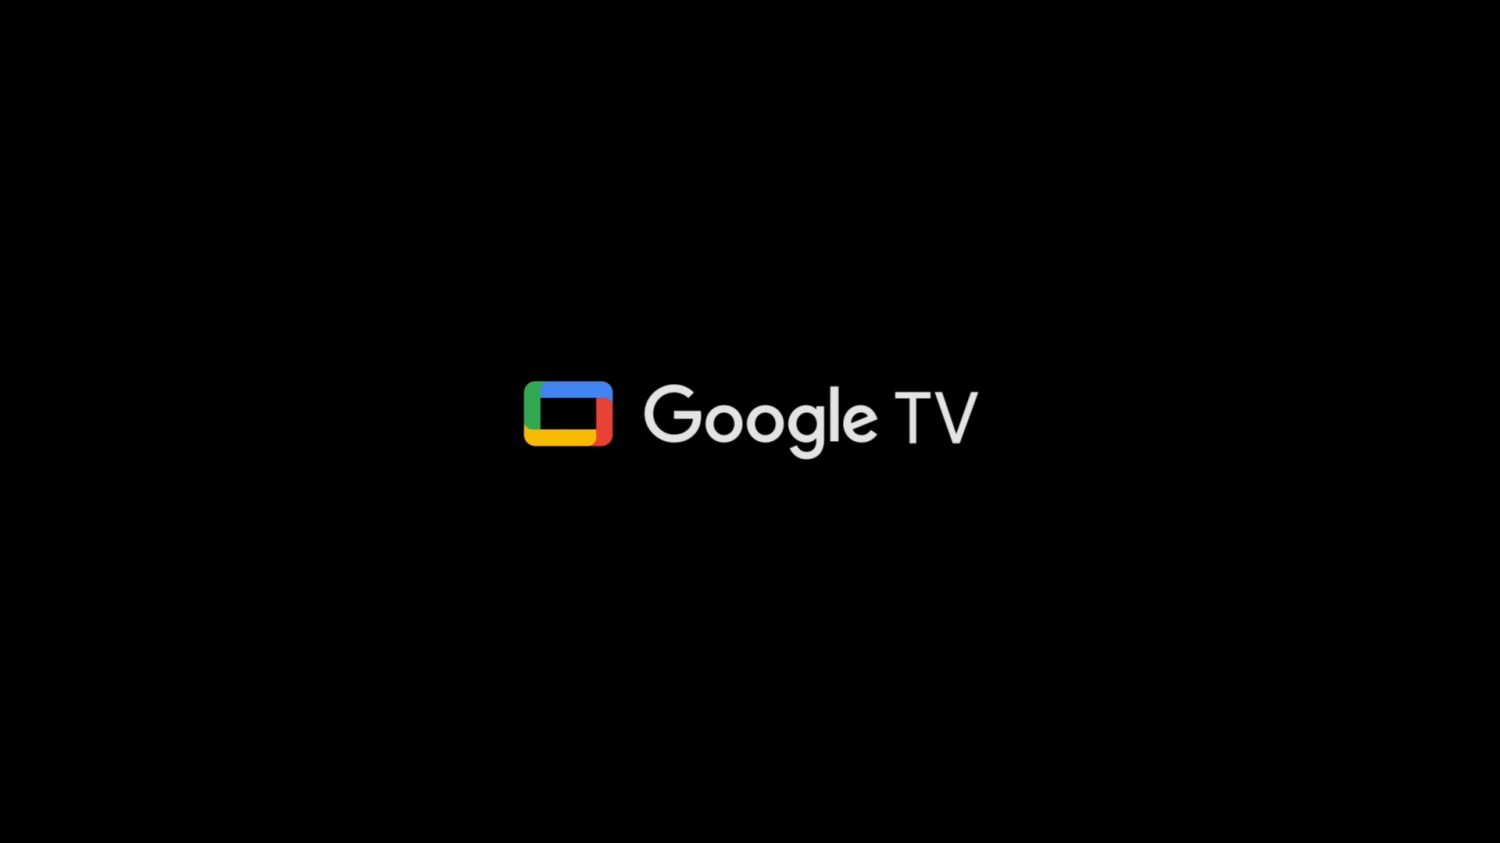 Google TV is expected to receive live TV channels and improvements to Smart Home soon